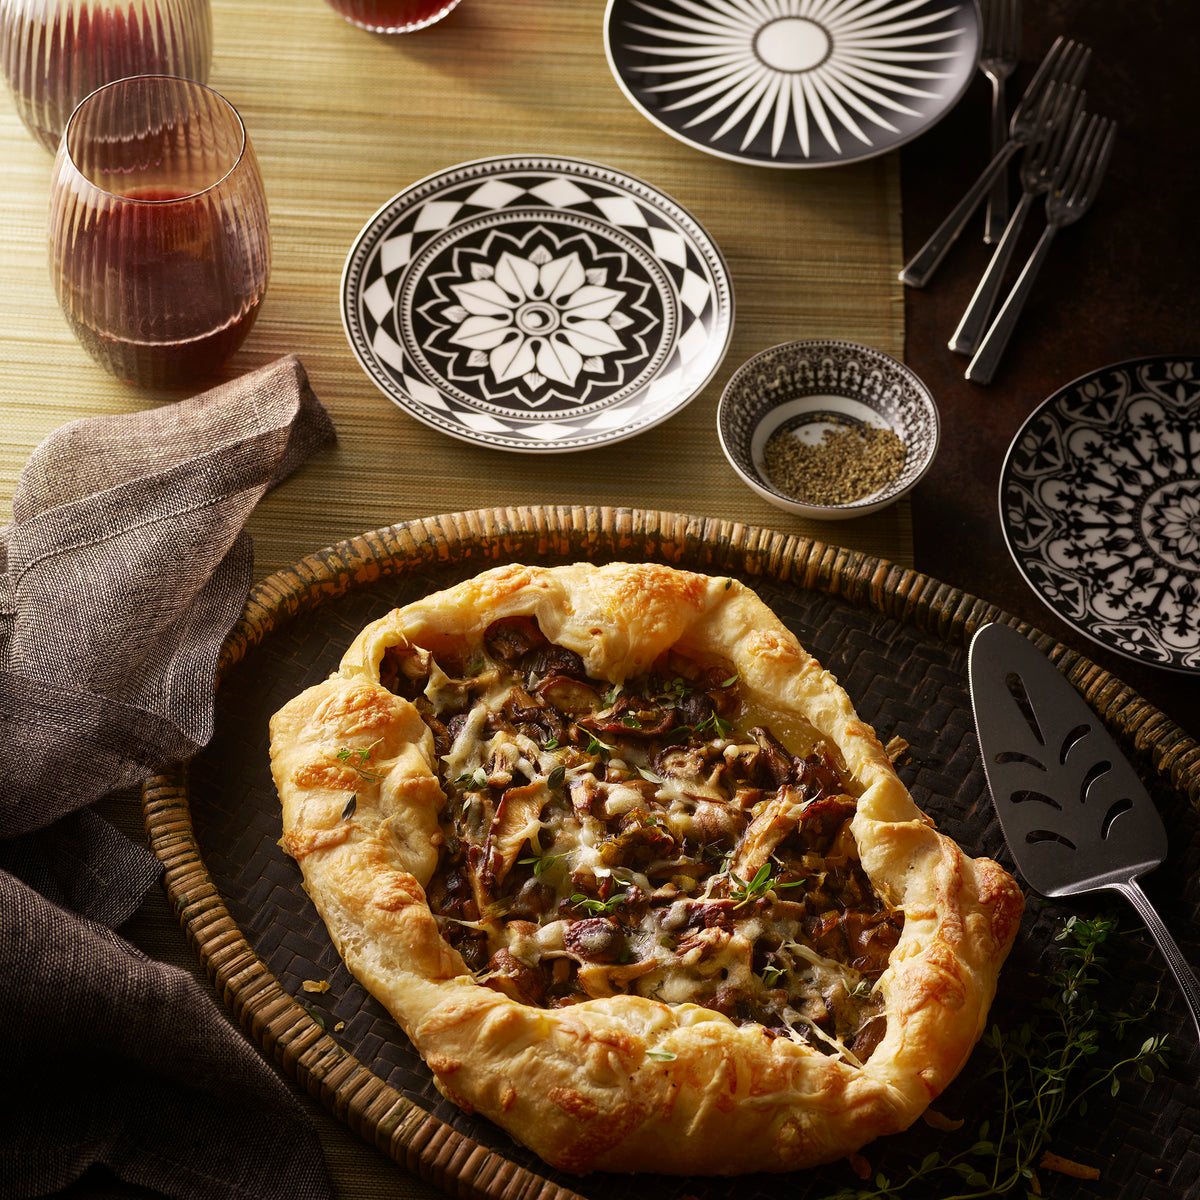 A rustic vegetable galette on a wicker tray, surrounded by Caskata Artisanal Home&#39;s Fez Small Plates featuring bold geometrics, silverware, two glasses of red wine, and a small bowl of herbs on a woven tablecloth.